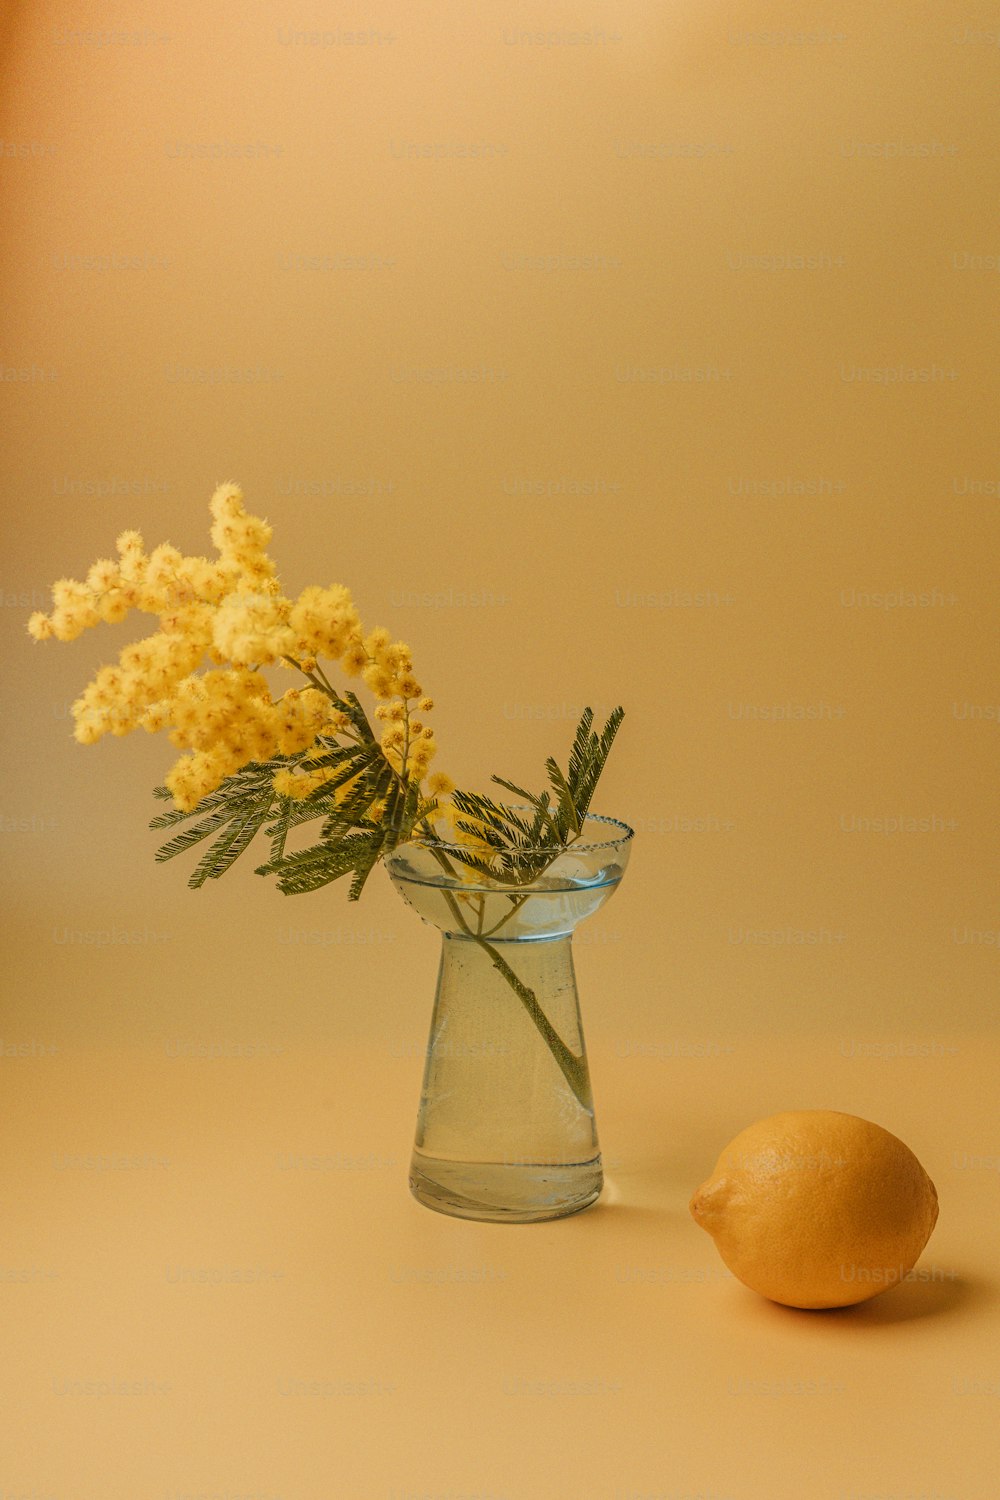 a yellow flower in a glass vase next to a lemon